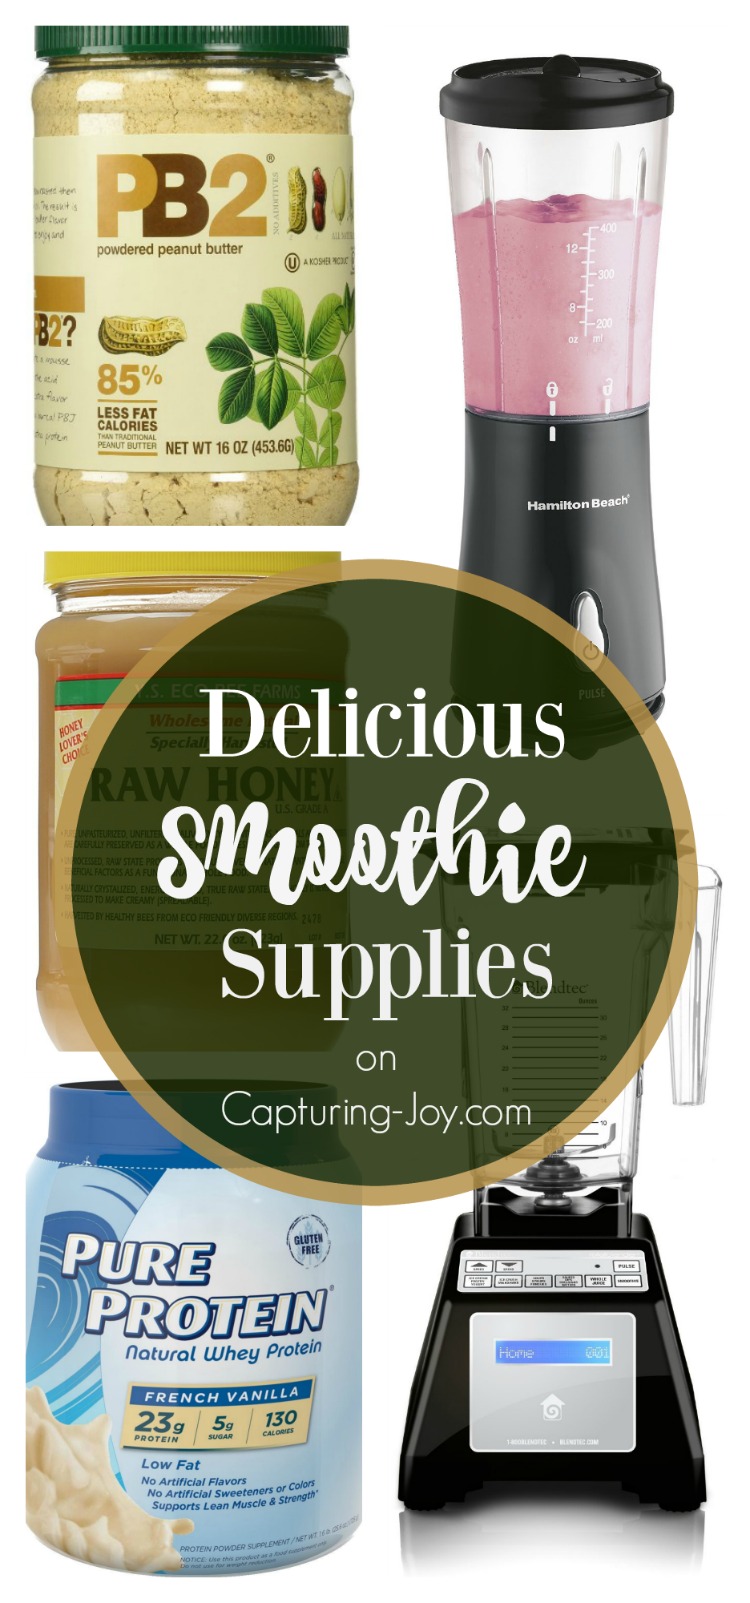 One stop shop for the best smoothies! Get the whole list at Capturing-Joy.com!